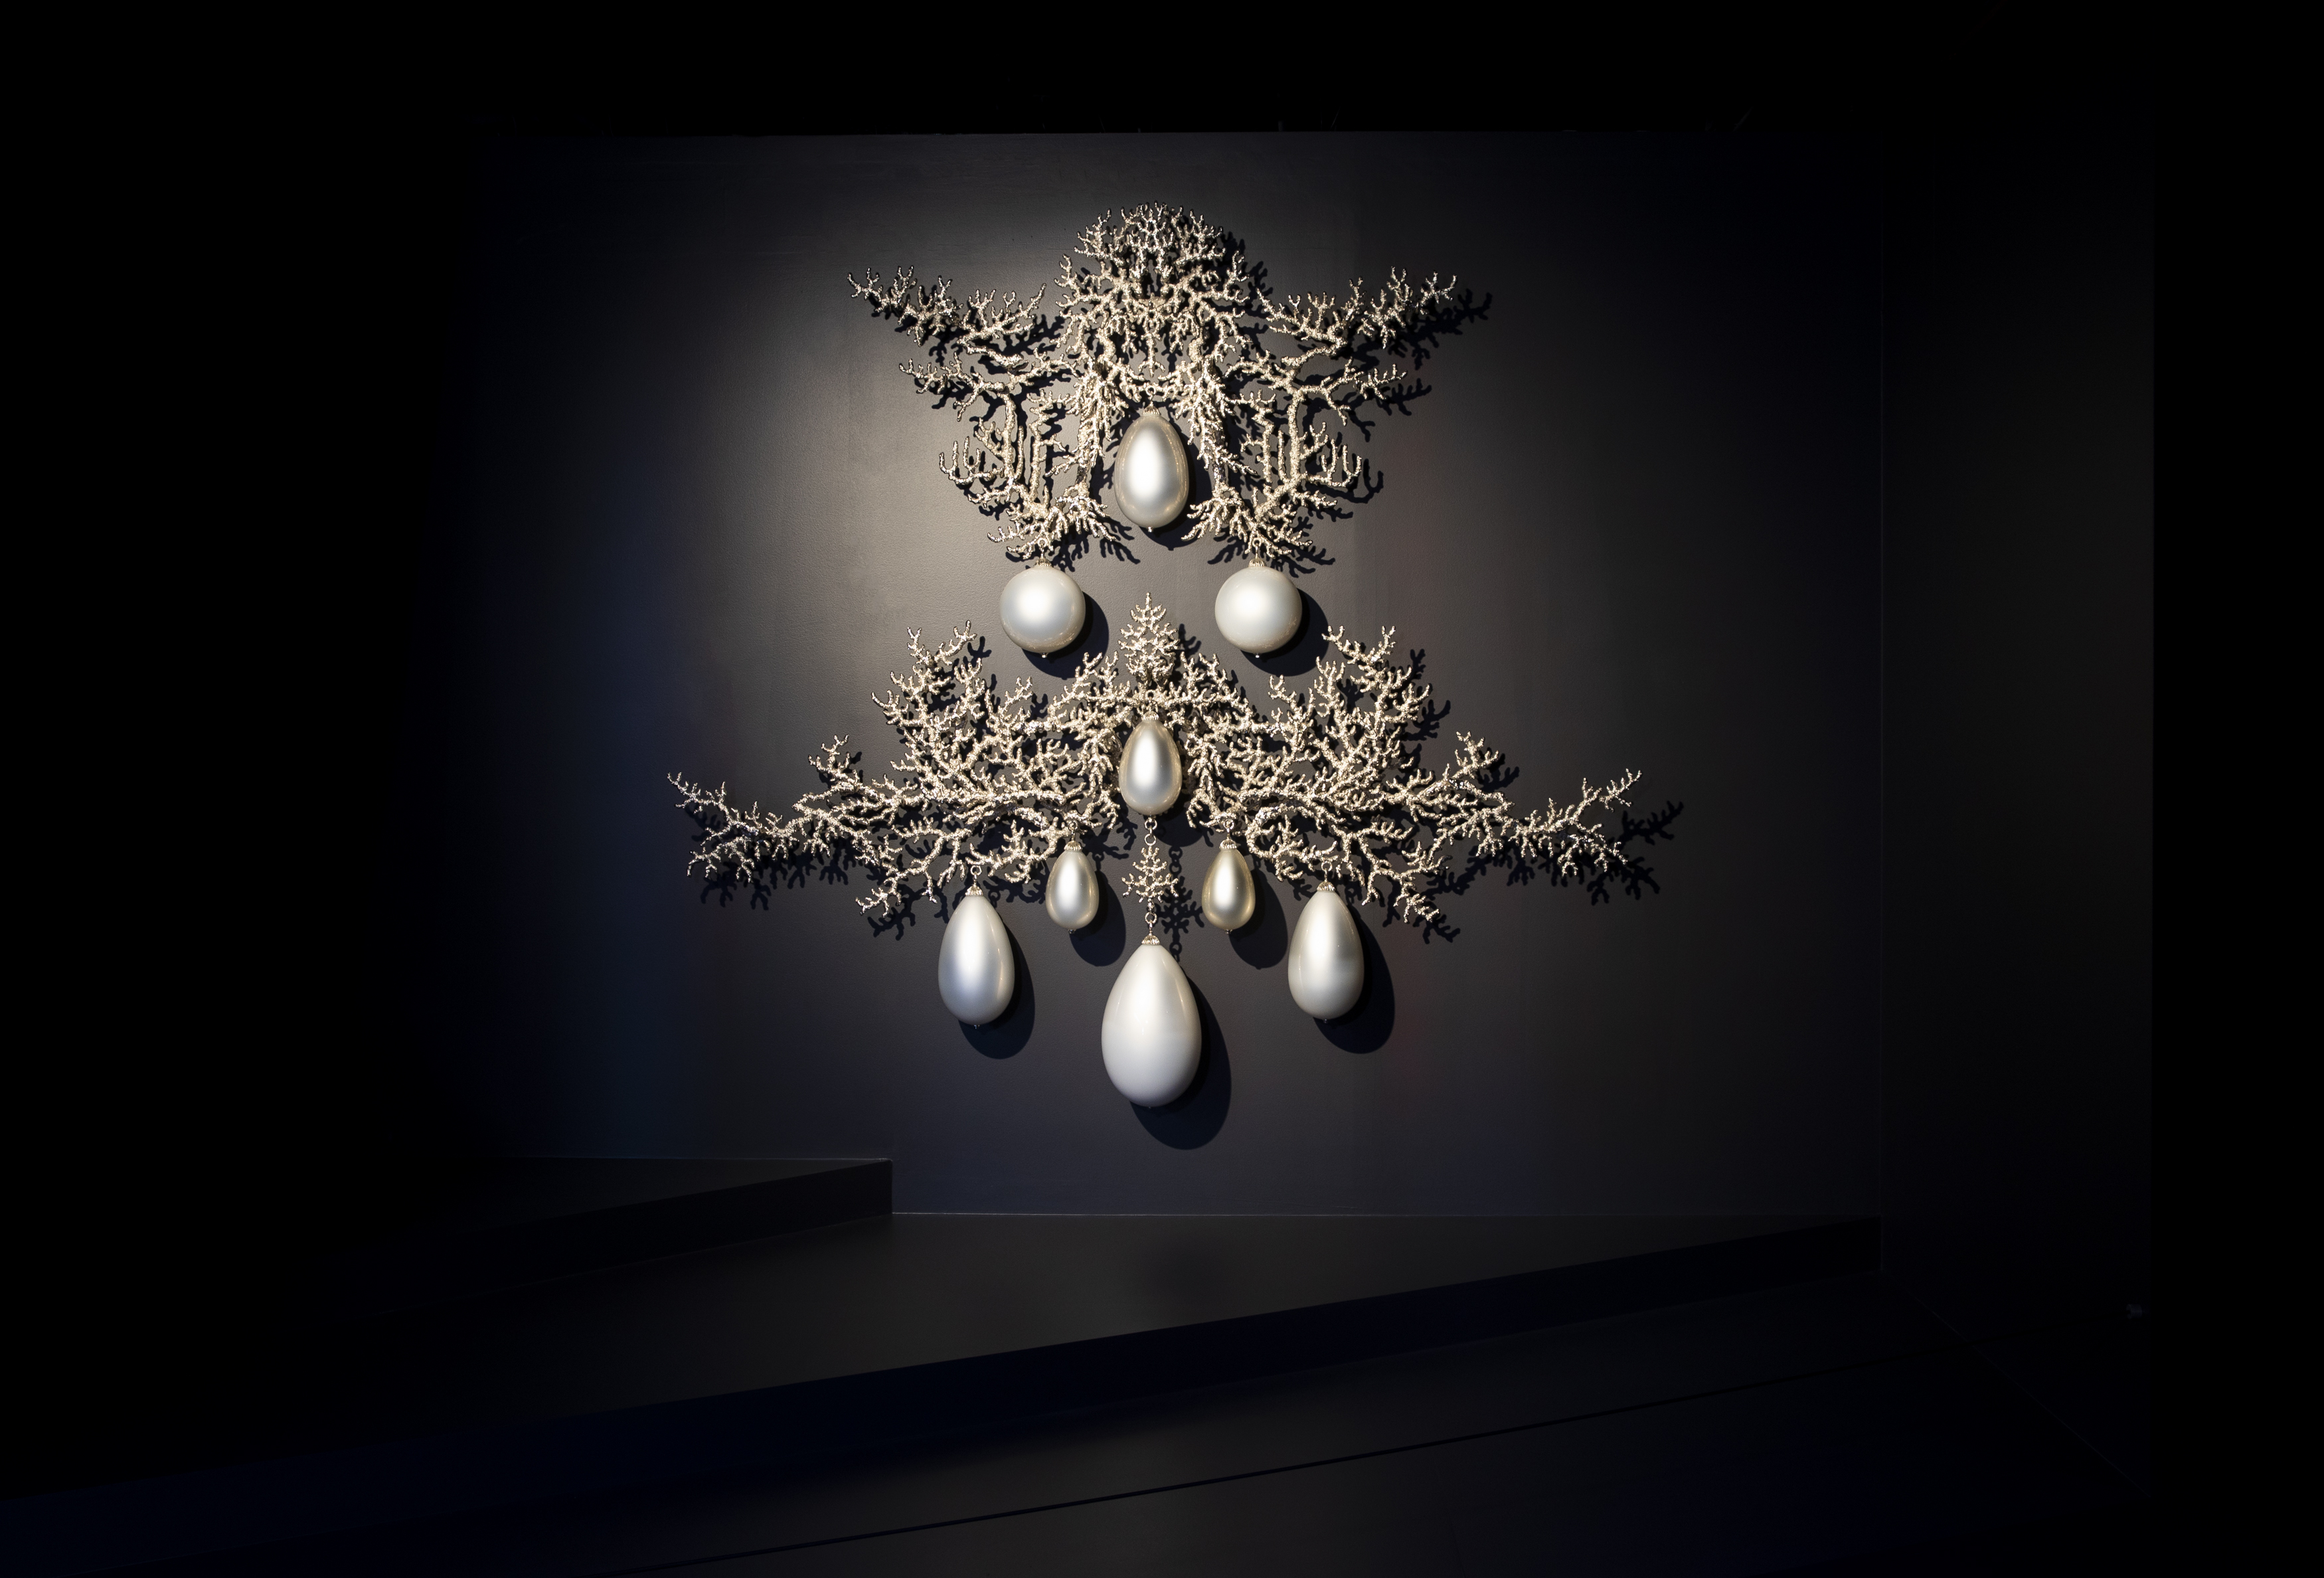 An ornate artwork in silver and white hangs on a black wall. It is in the form of a large symmetrically designed earring formed from silvery coral-like branches set with tear-shaped white glass pendants that look like pearls.